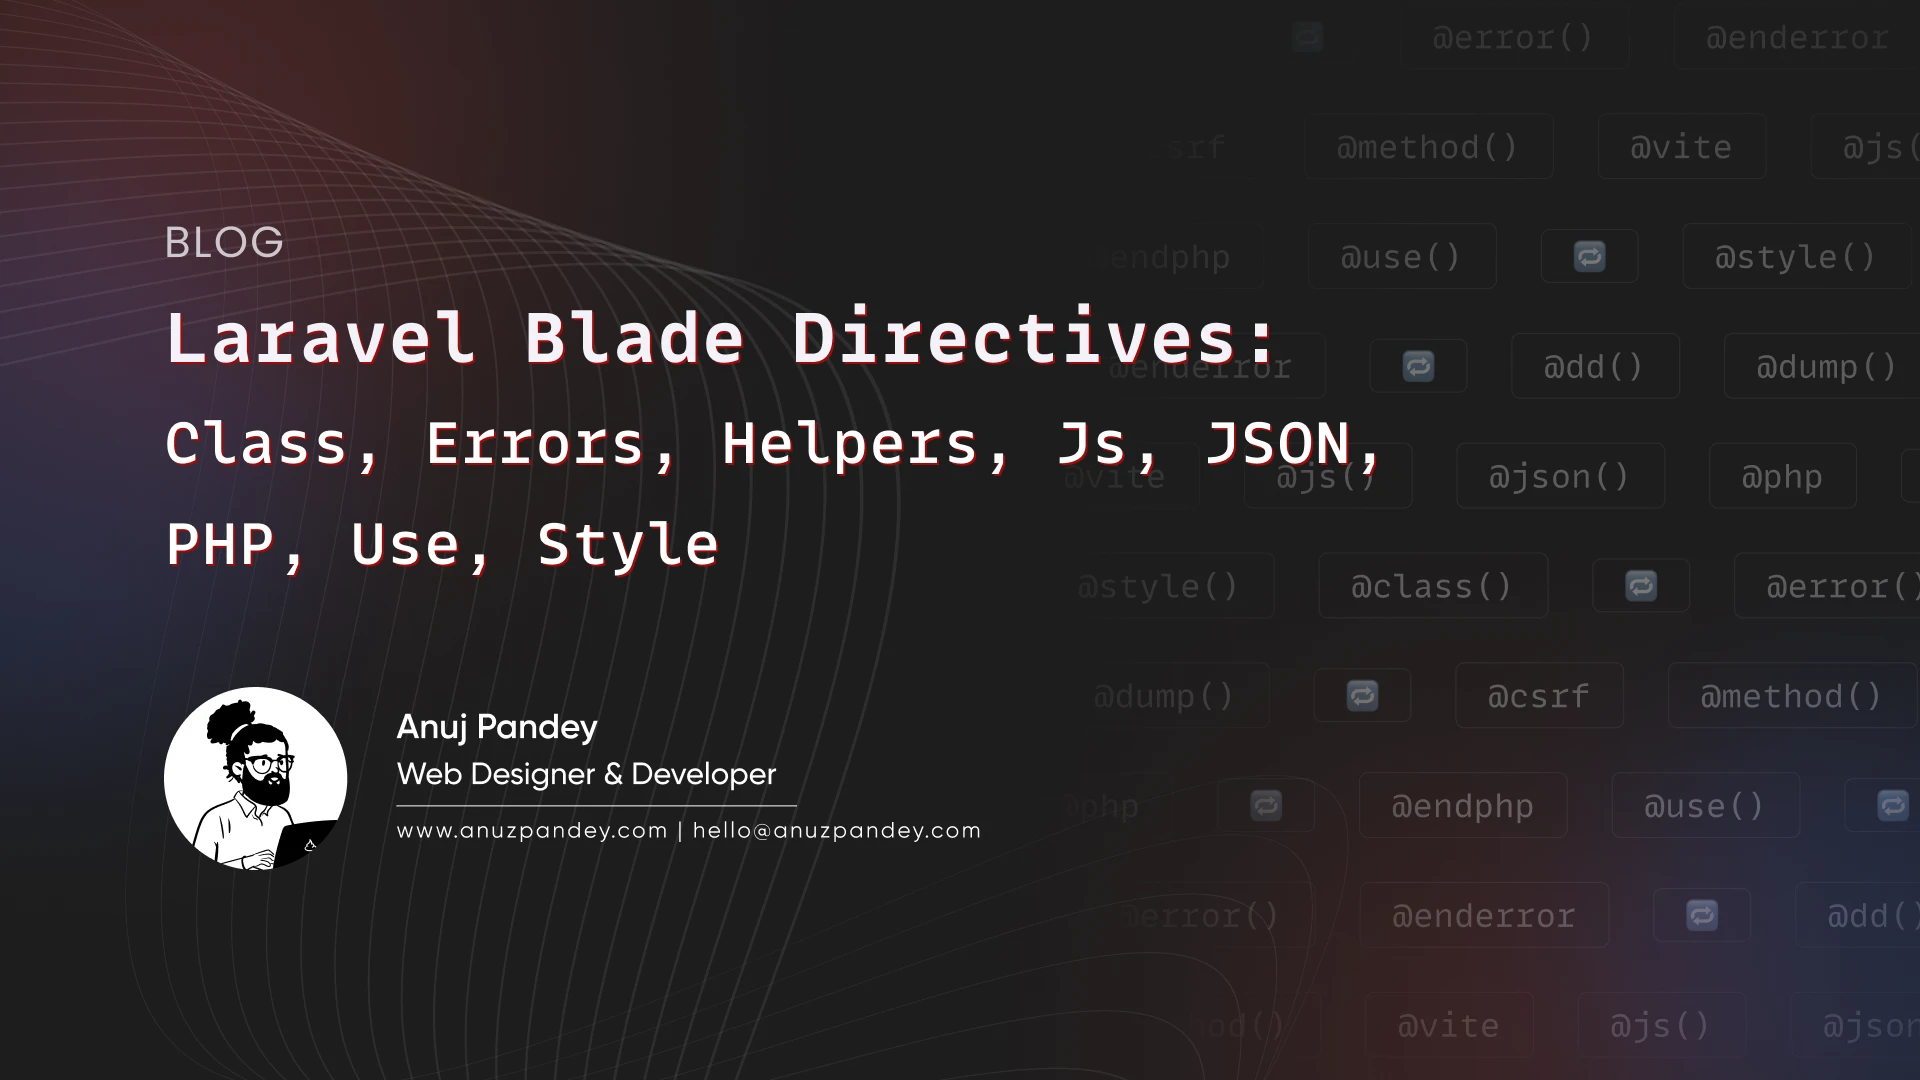 Laravel Blade Directives: Class, Errors, Helpers, JS, JSON, PHP, Use, and Style